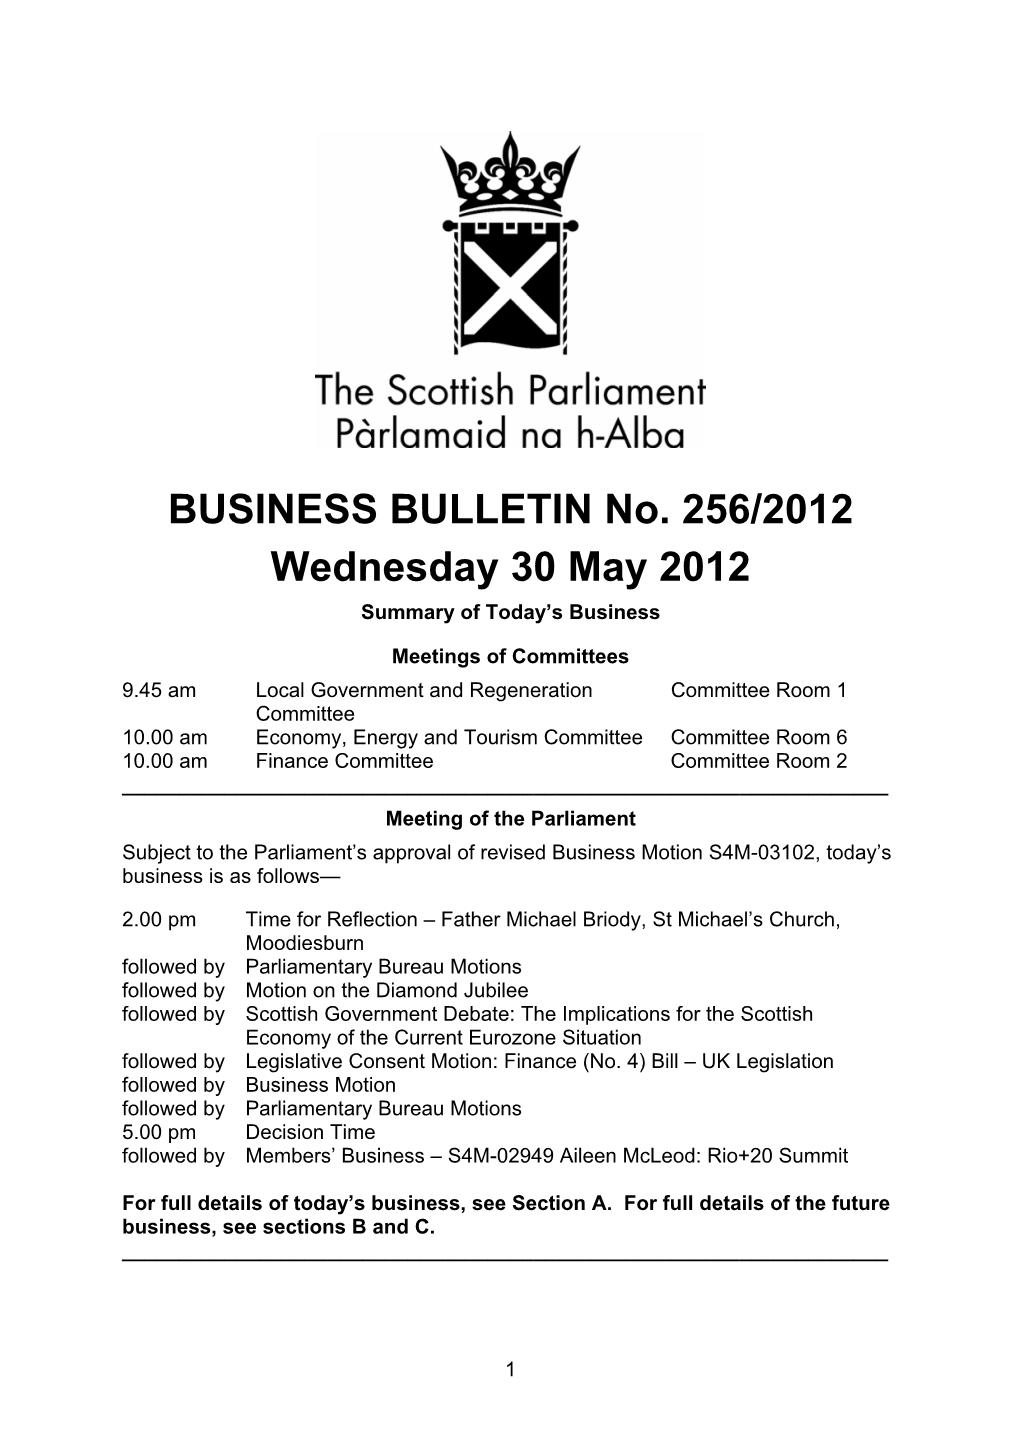 BUSINESS BULLETIN No. 256/2012 Wednesday 30 May 2012 Summary of Today’S Business